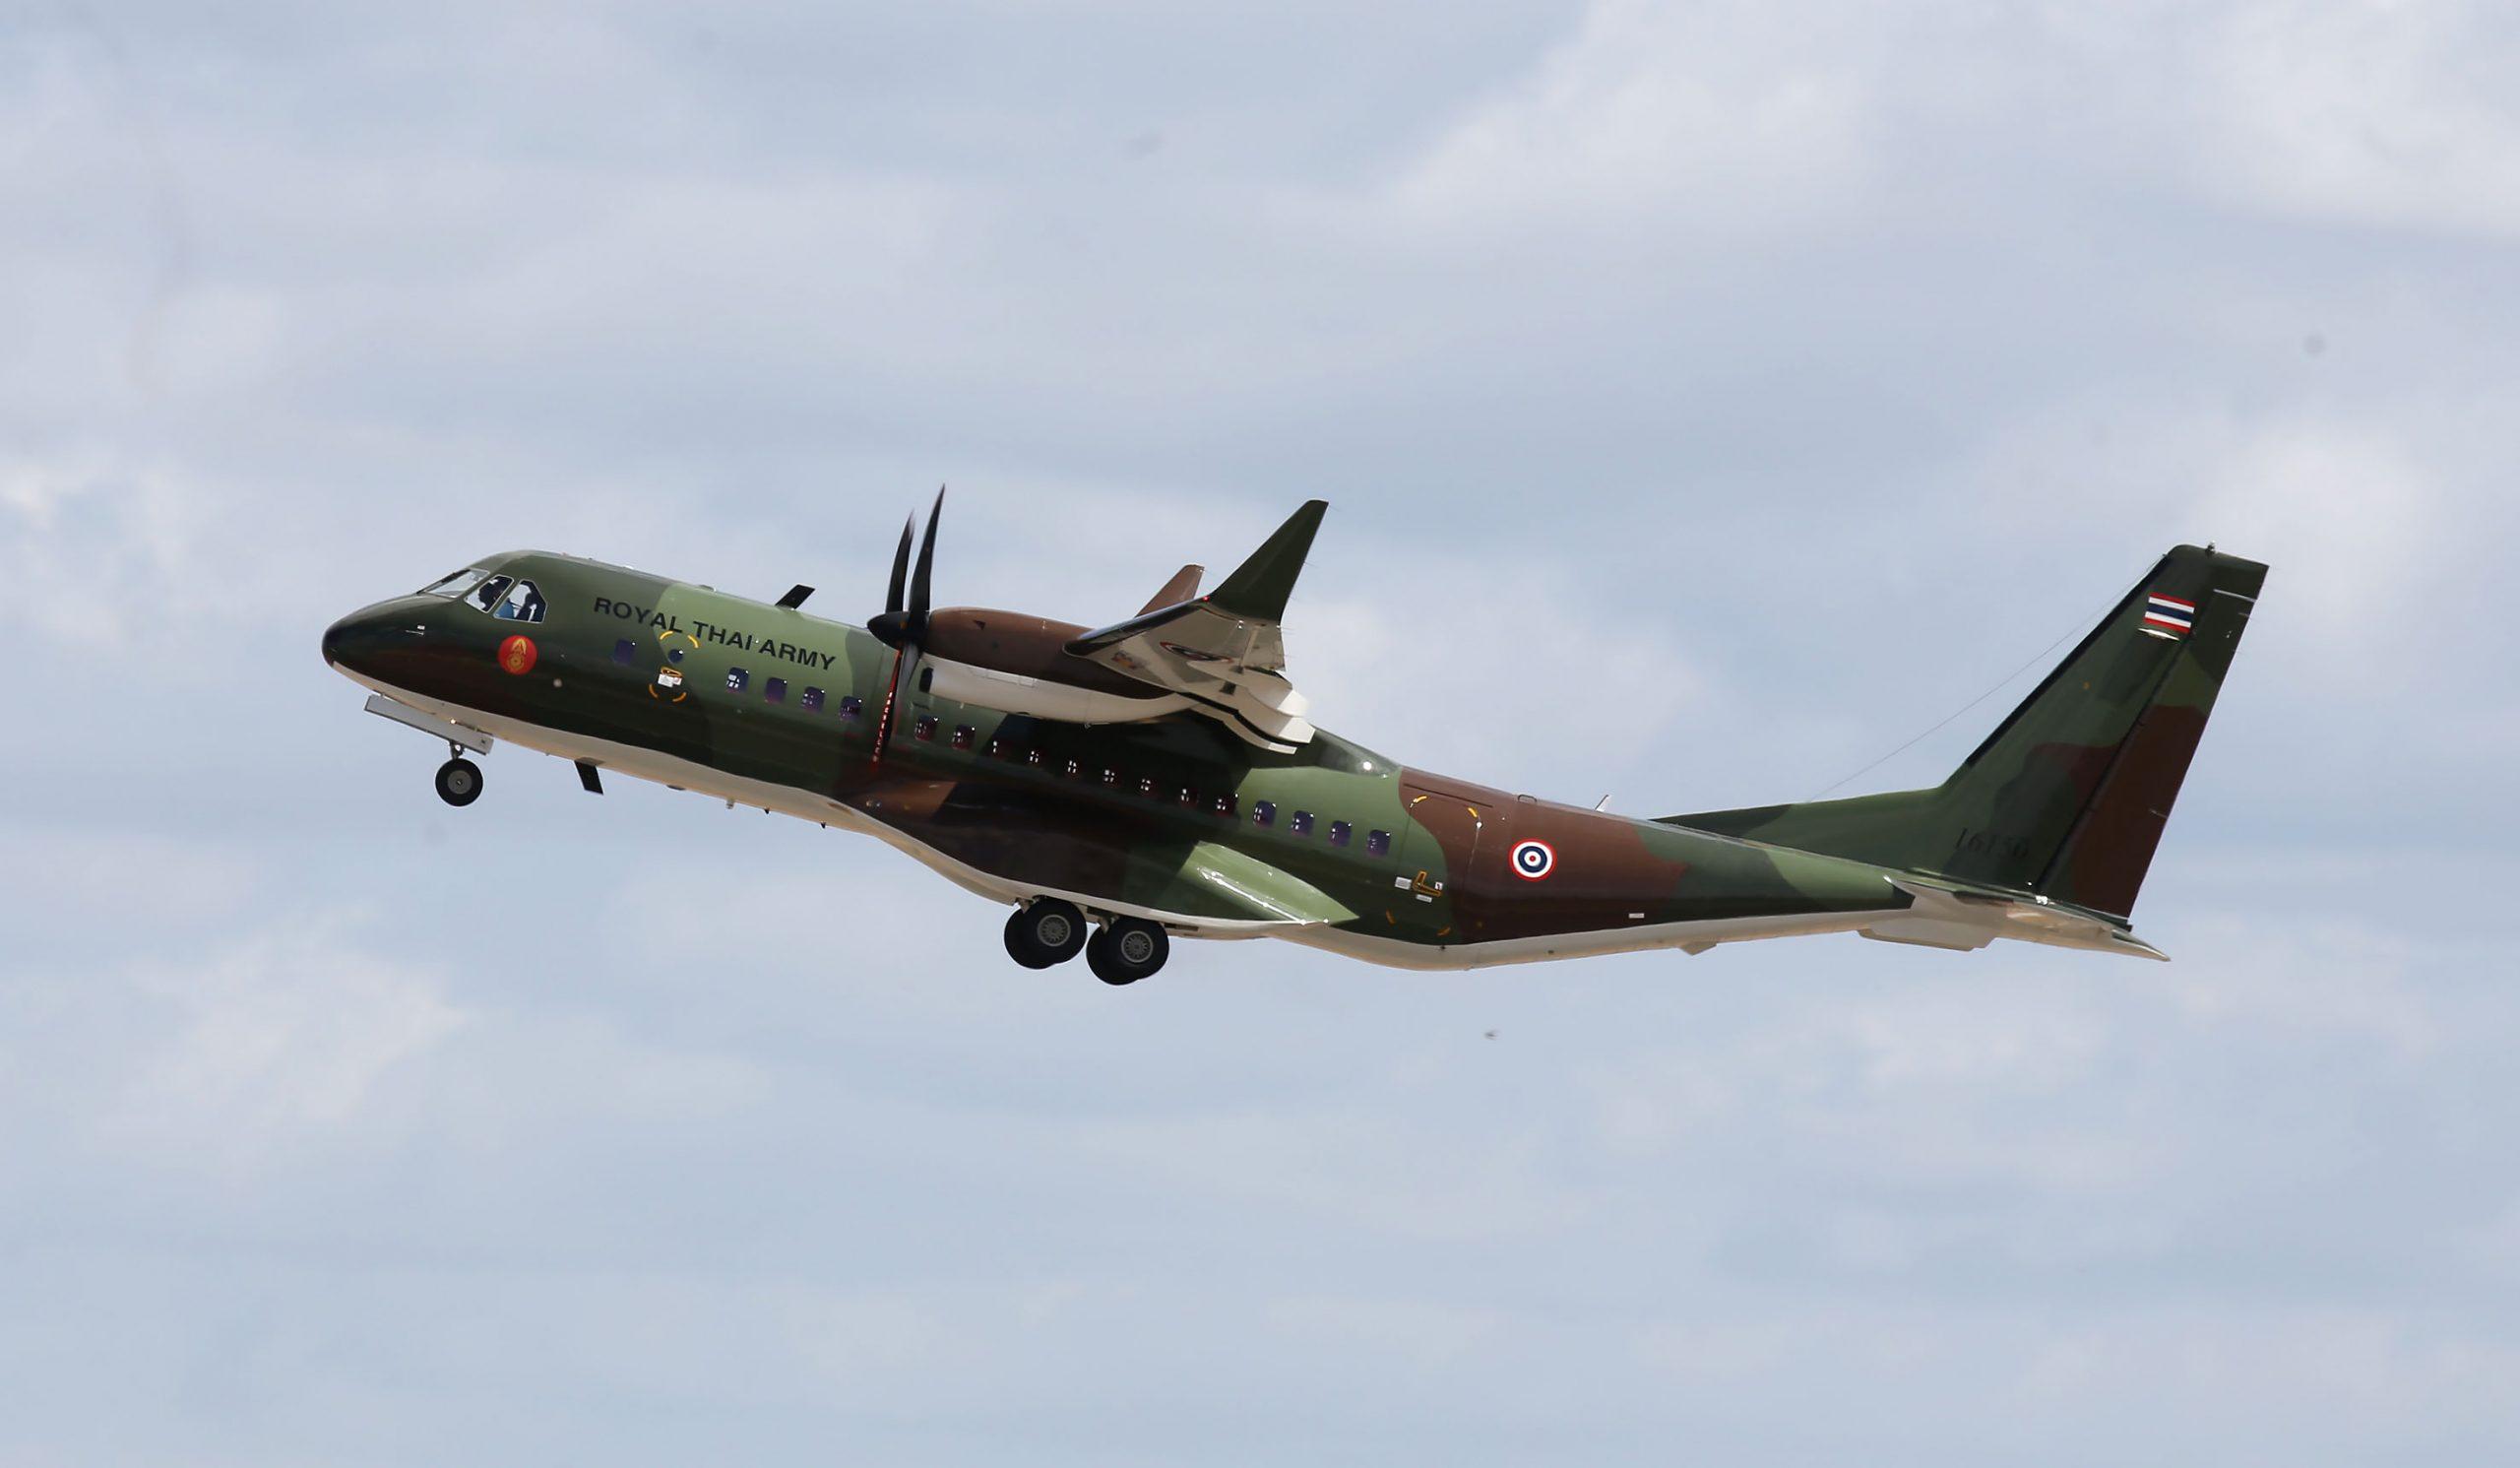 The Royal Thai Army will receive an additional Airbus C295 air-lifter with a firm order placed by the Ministry of Defence of Thailand